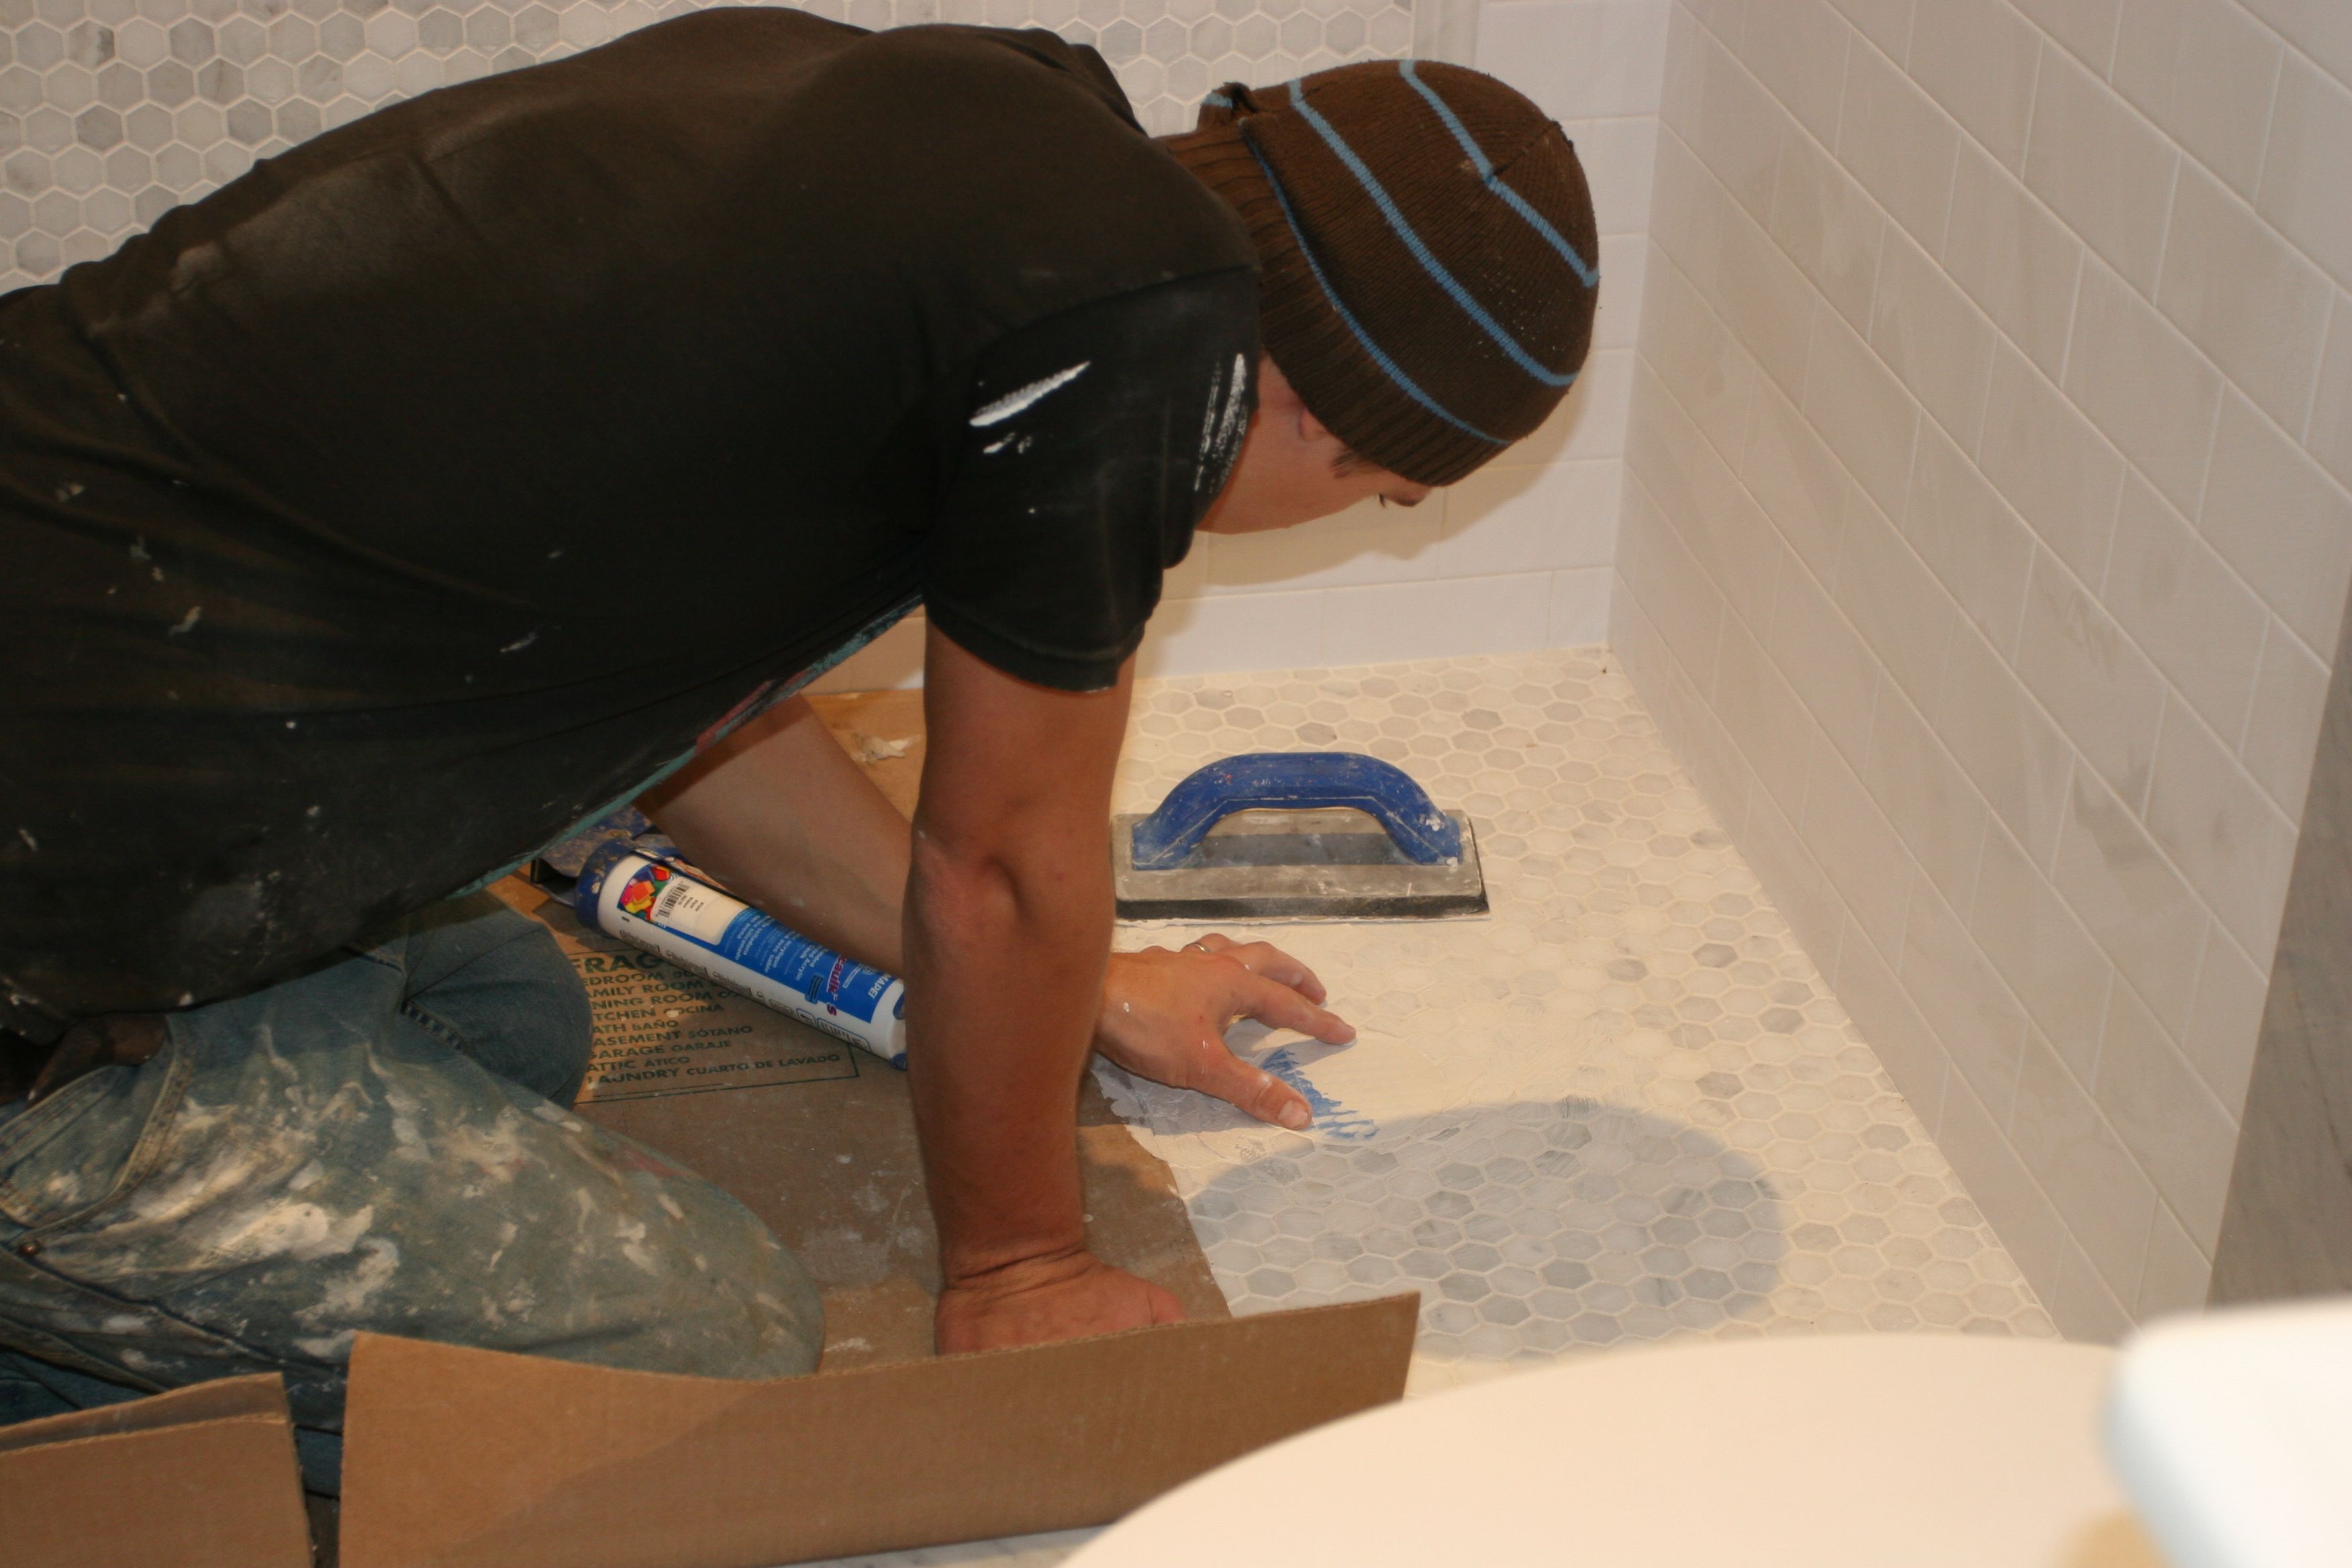 J.J. finishing up the shower drain (hidden underneath the grout).